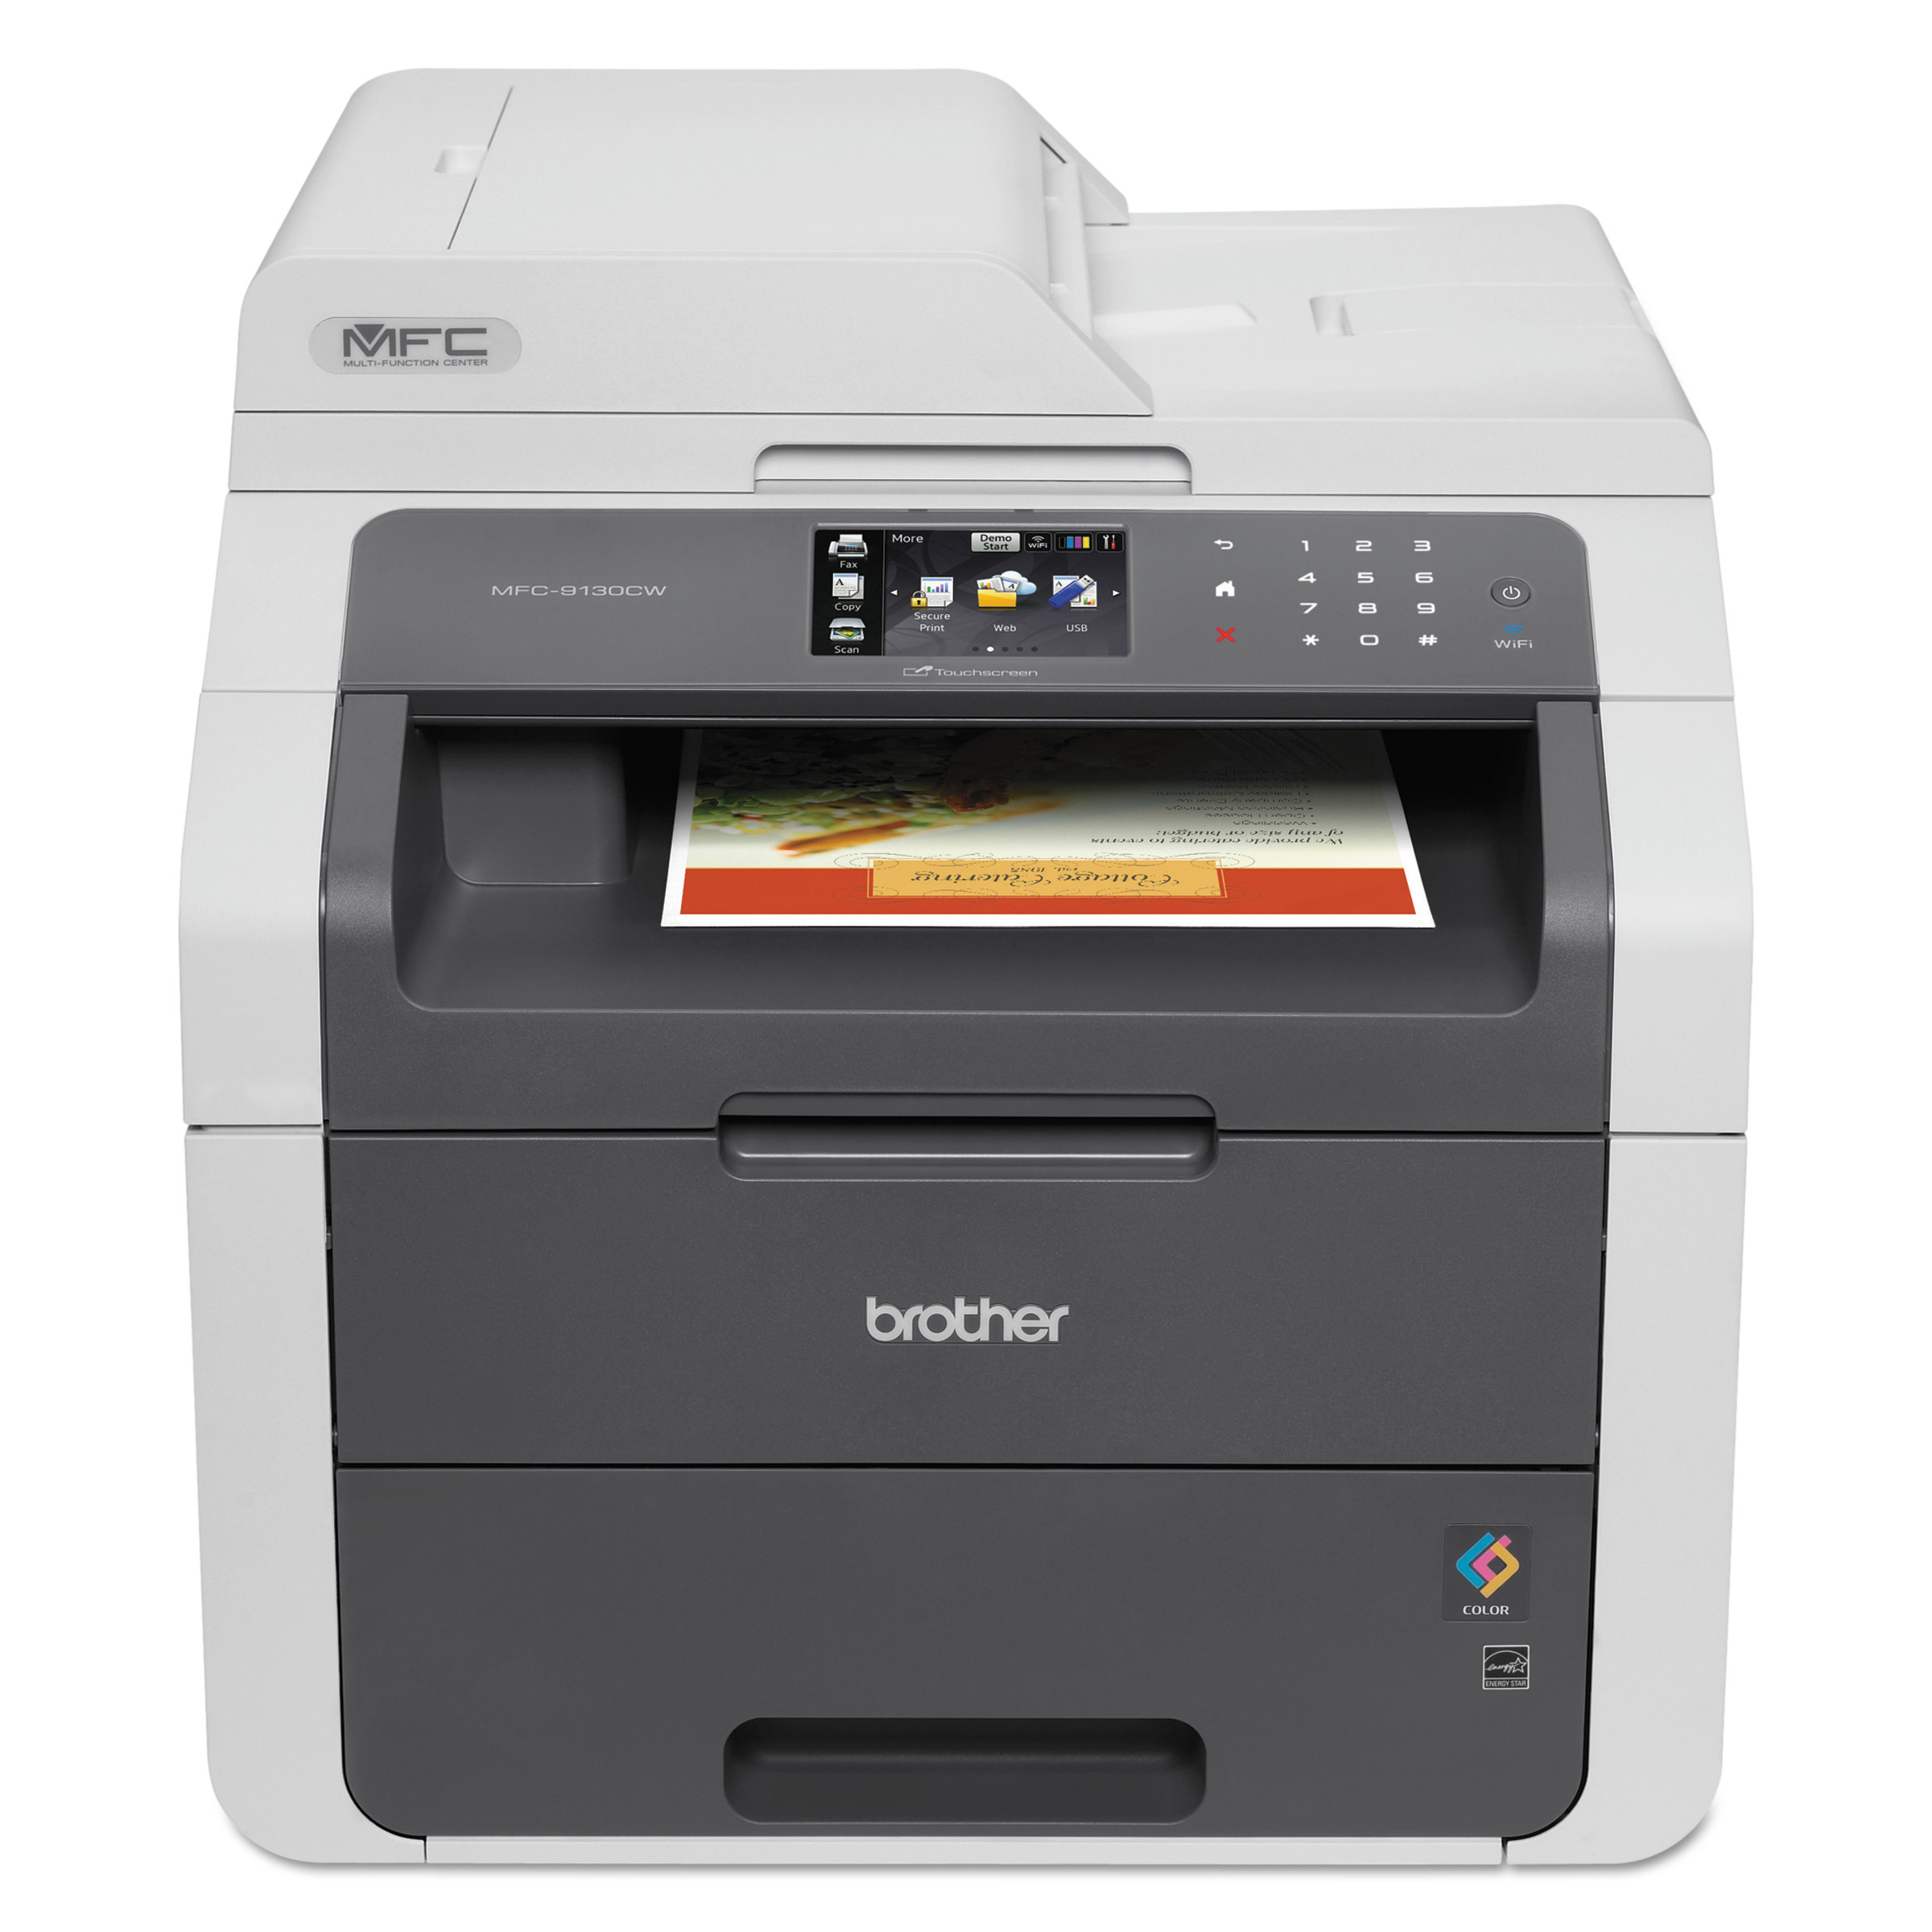 Brother MFC-9130CW Digital Color All-in-One with Wireless Networking Printer/Copier/Scanner/Fax Machine - image 1 of 3